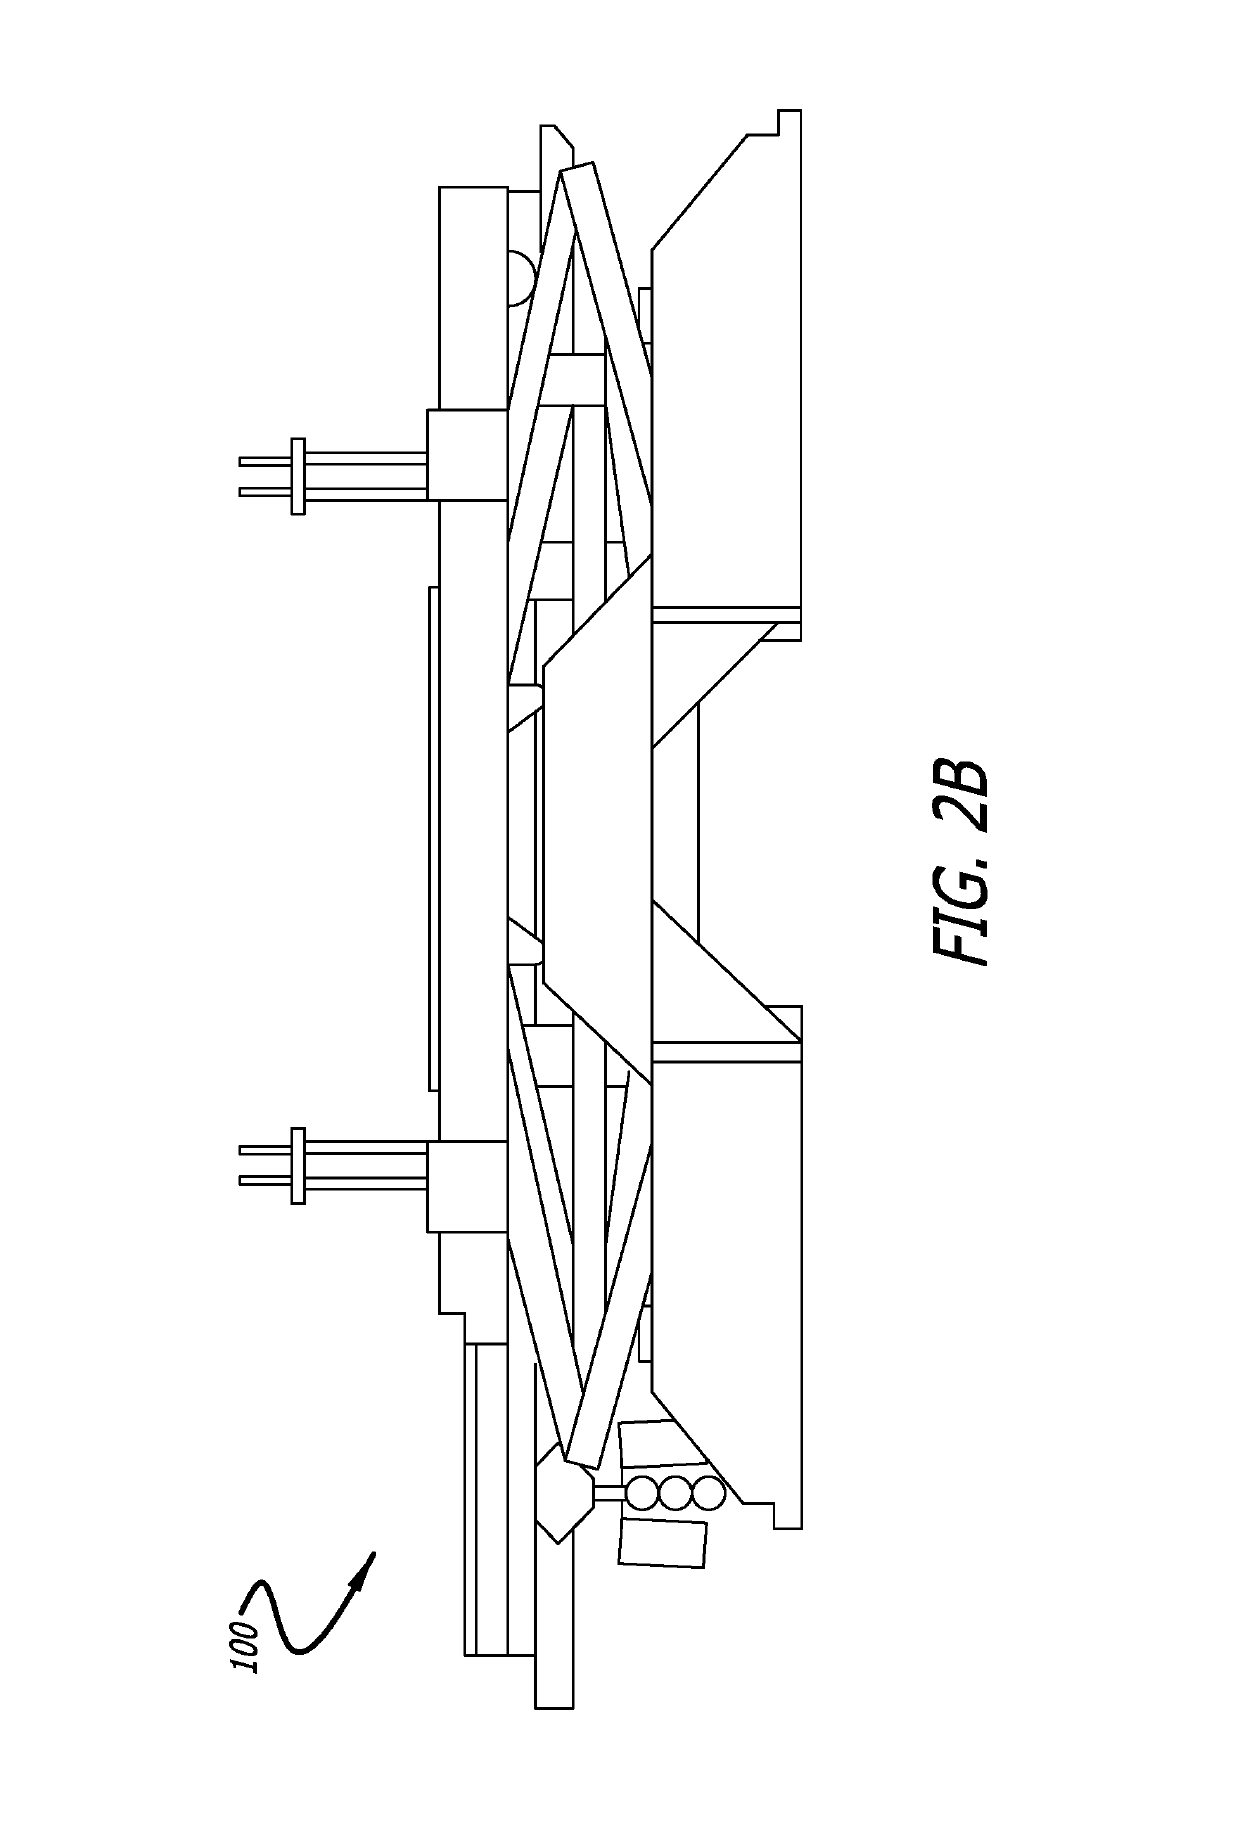 Drilling rig and method of use